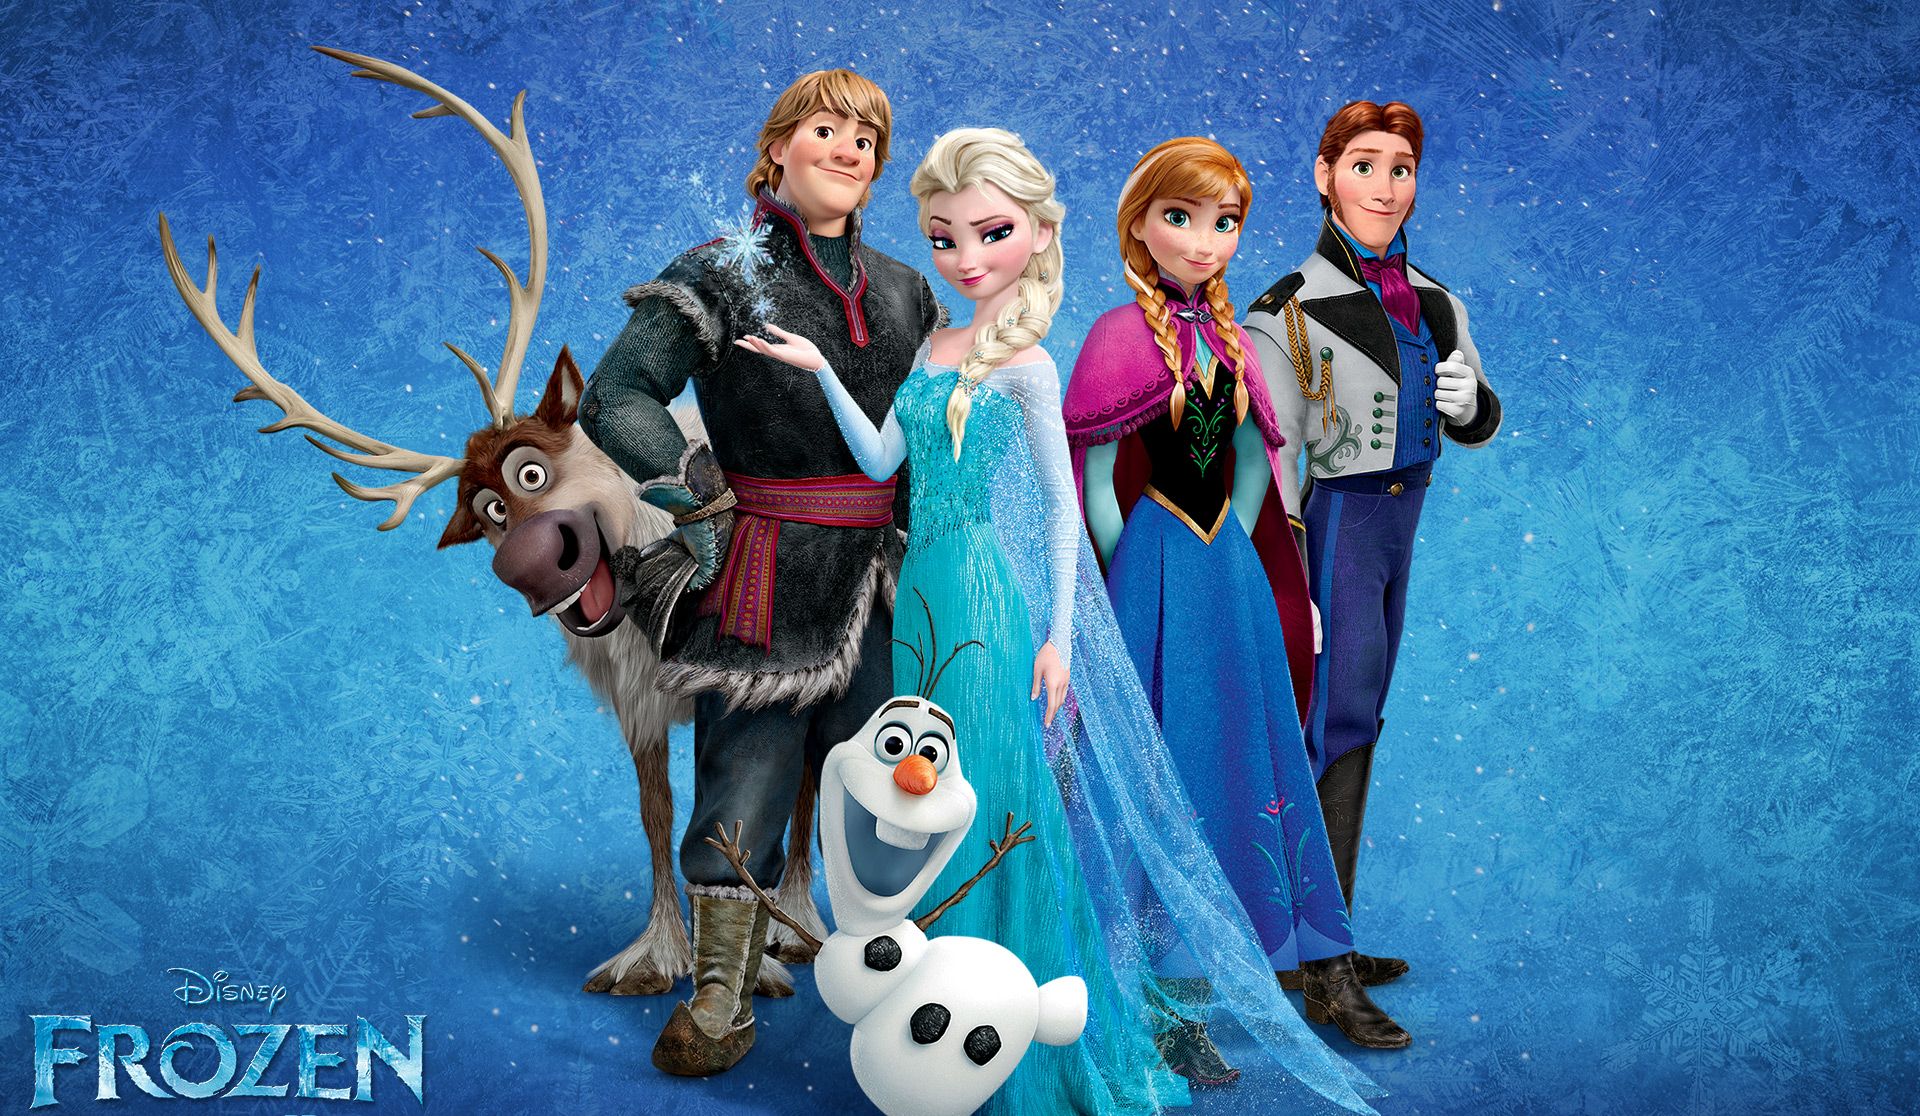 Box Office: Frozen freezes out Catching Fire